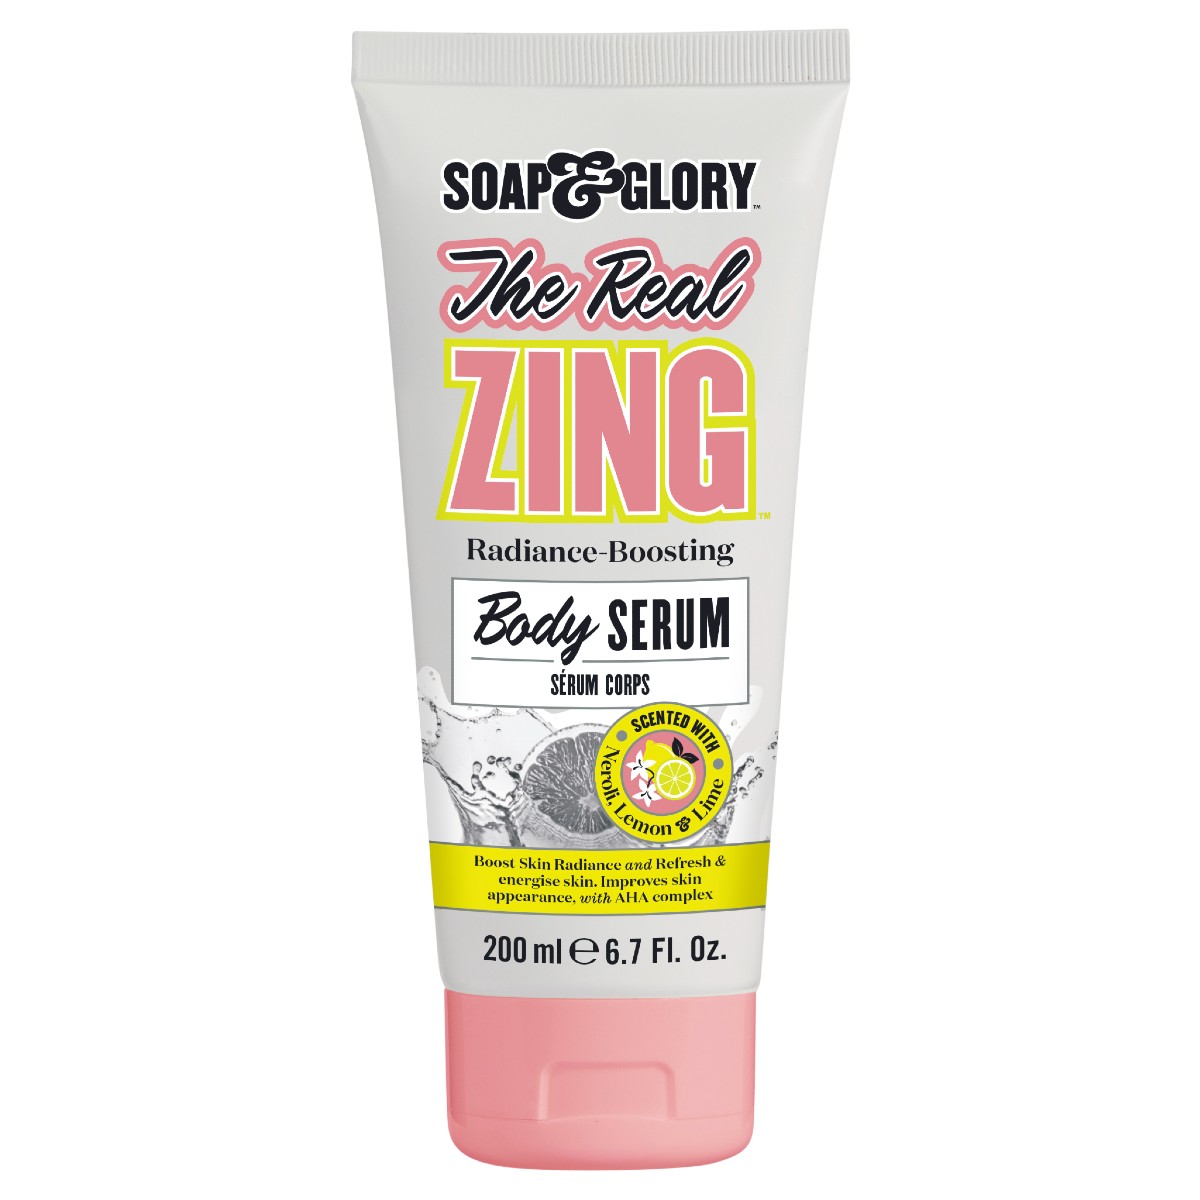 The Real Zing Body Serum